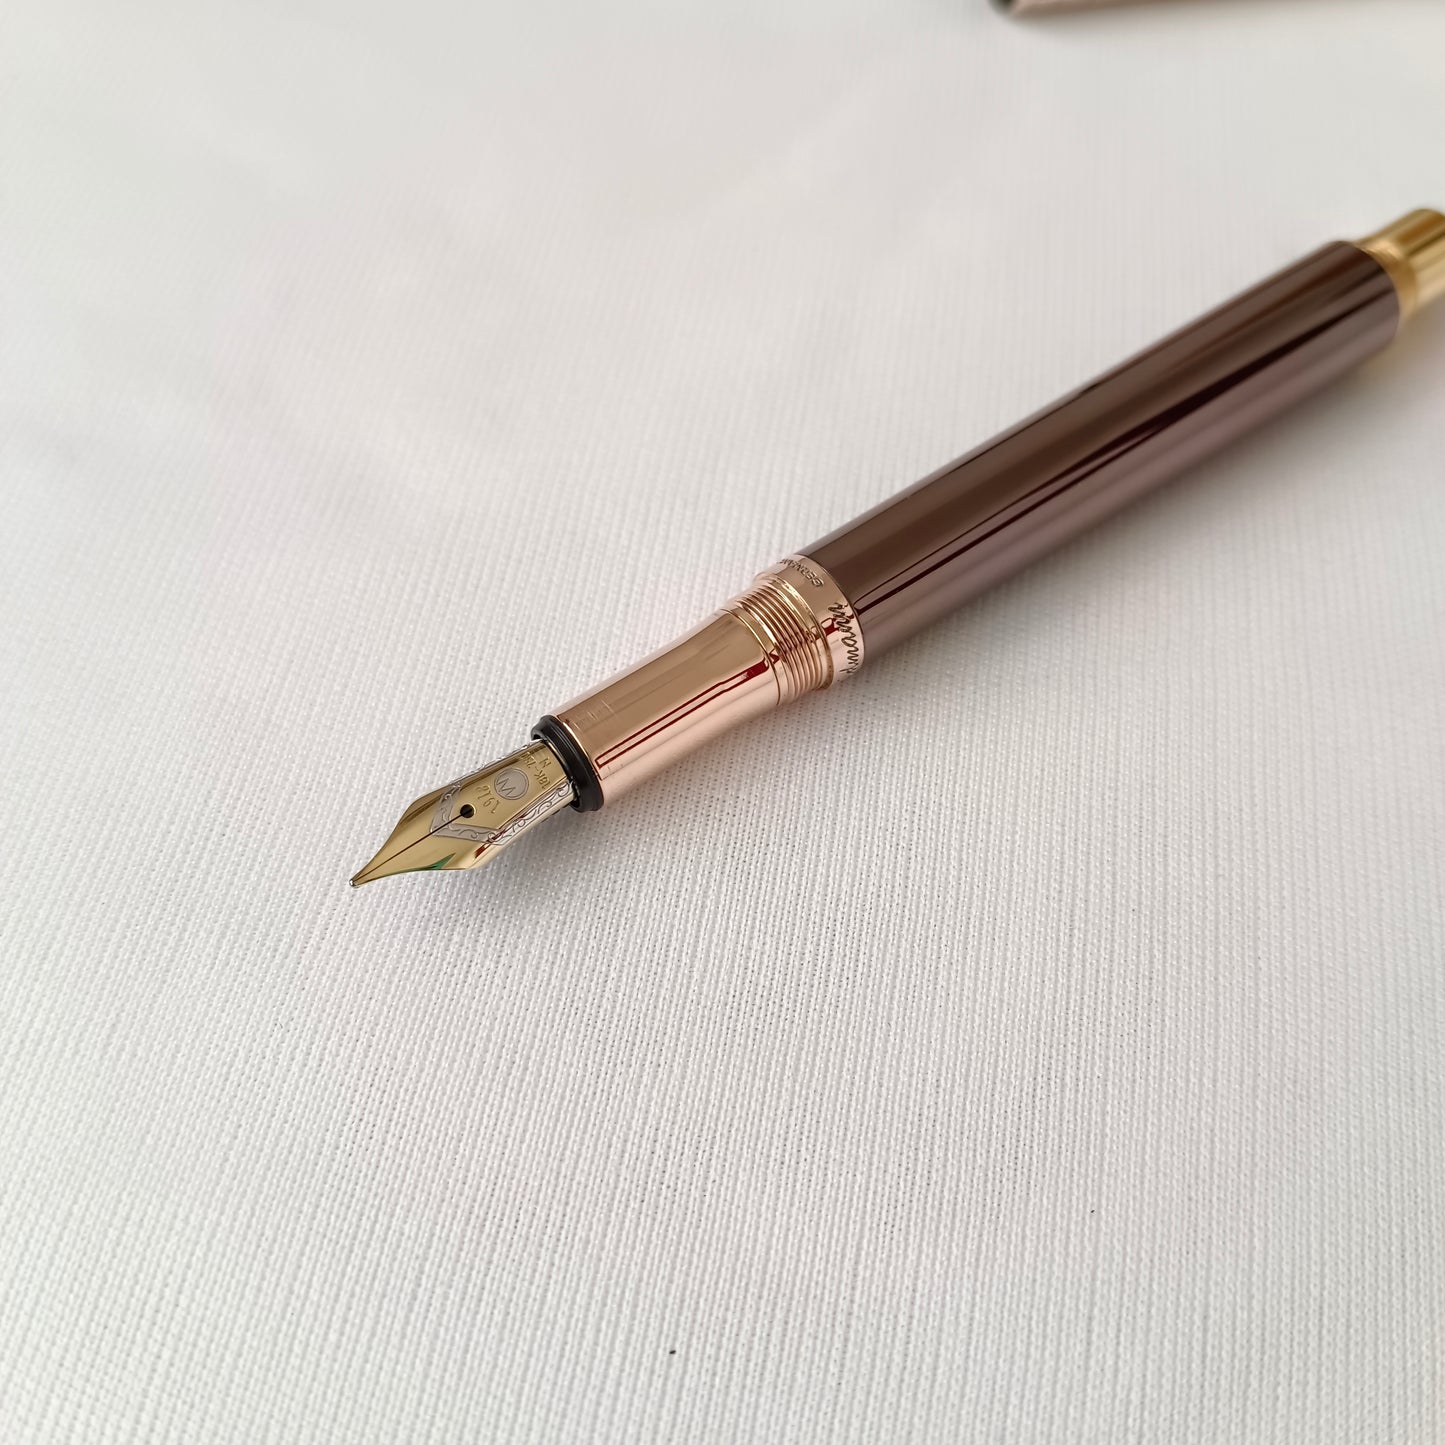 Waldmann Xetra Fountain Pen PVD Chocolate Rose Gold Plated 18kt Medium Nib Made In Germany